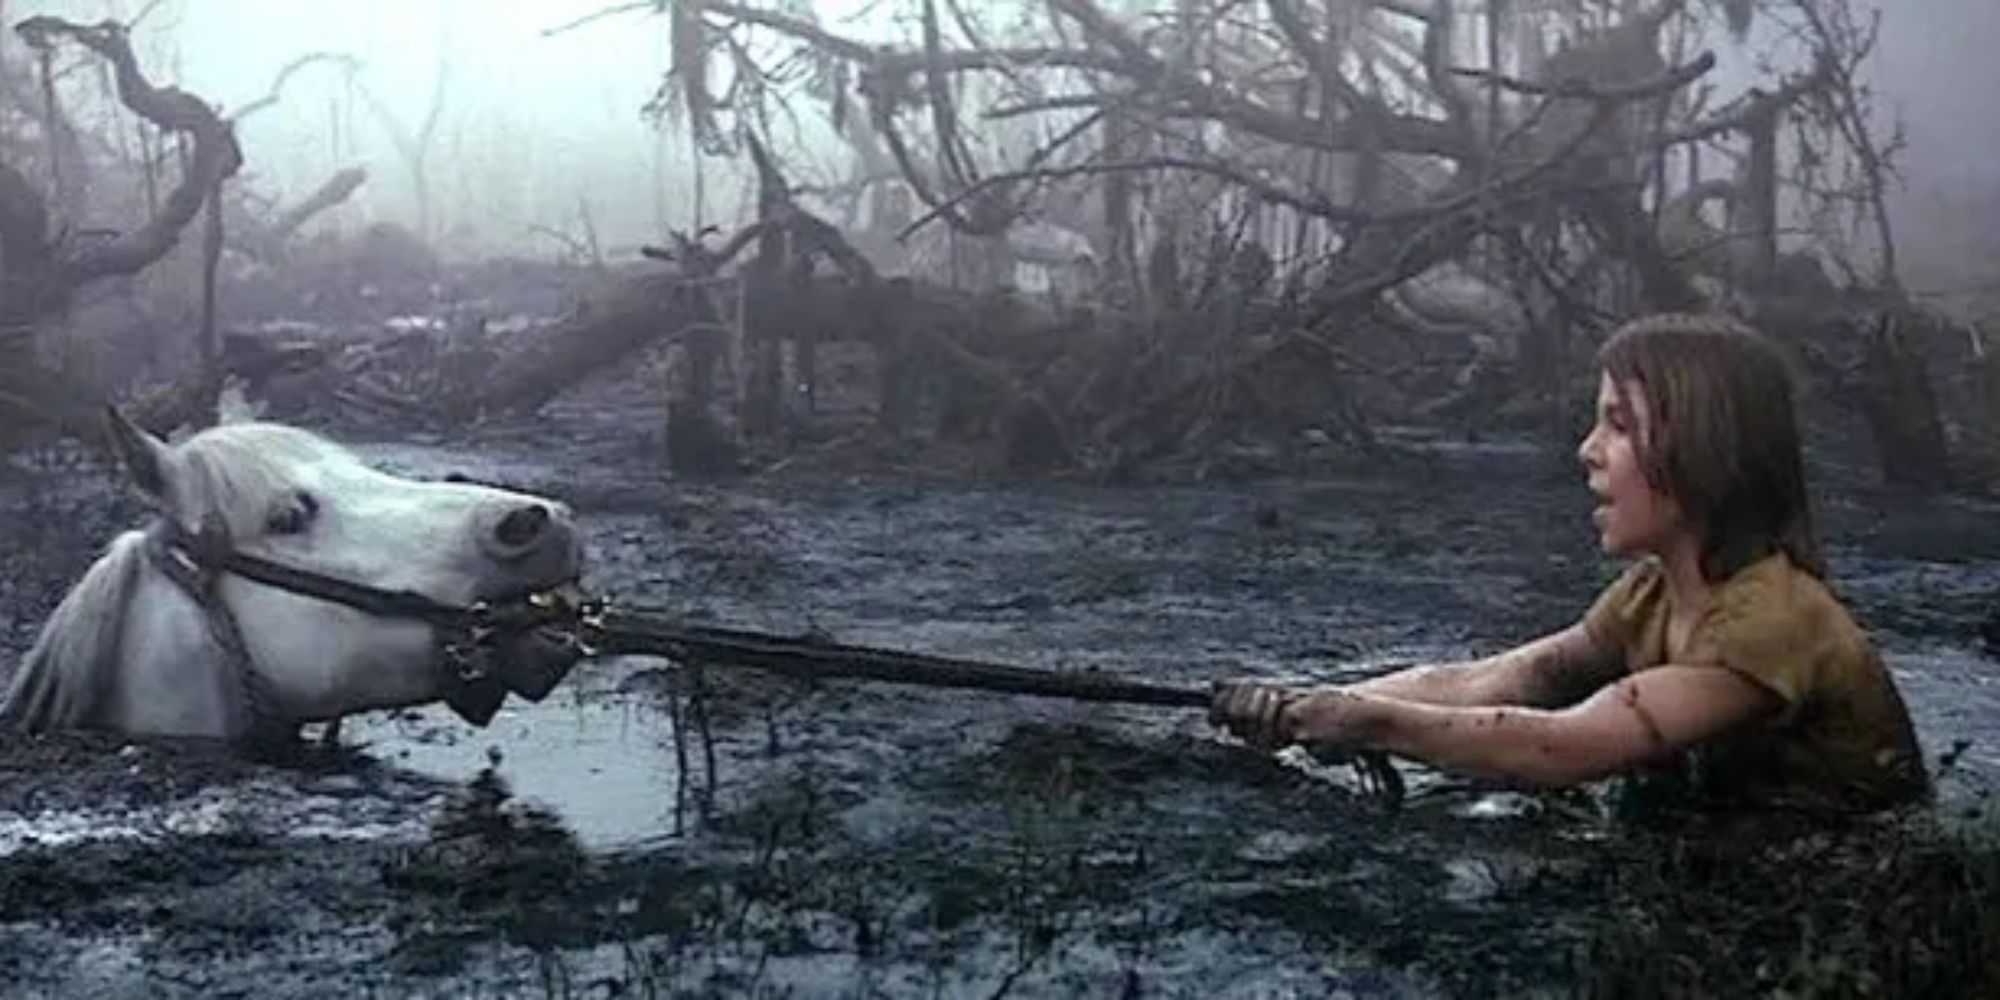 Atreyu tries his best to pull Artax out of the bog